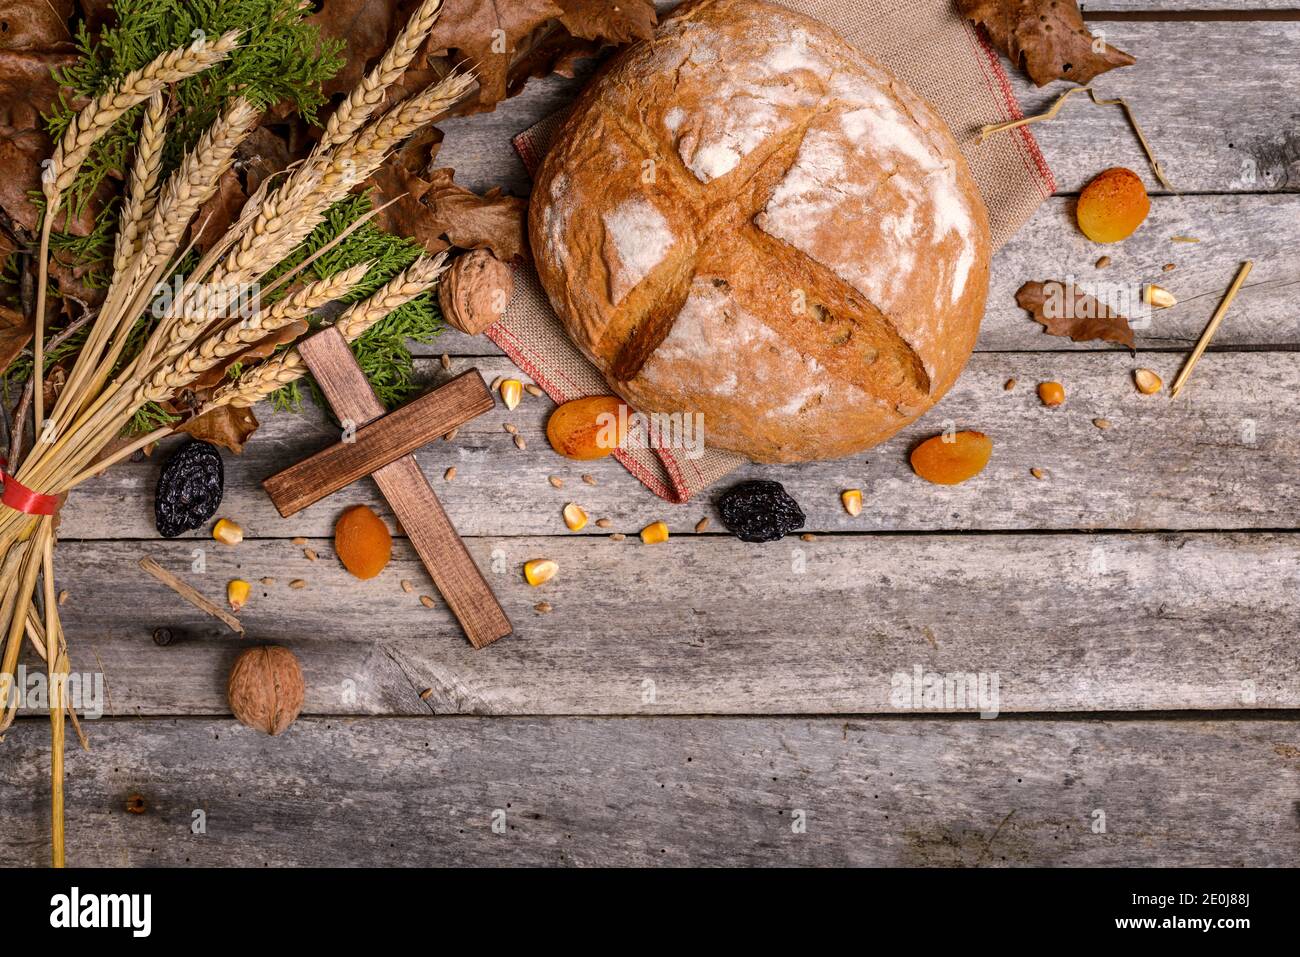 Traditional food for orthodox Christmas eve. Yule log or badnjak, bread, cereals, dried fruits and wooden cross on wooden table. Concept celebration o Stock Photo